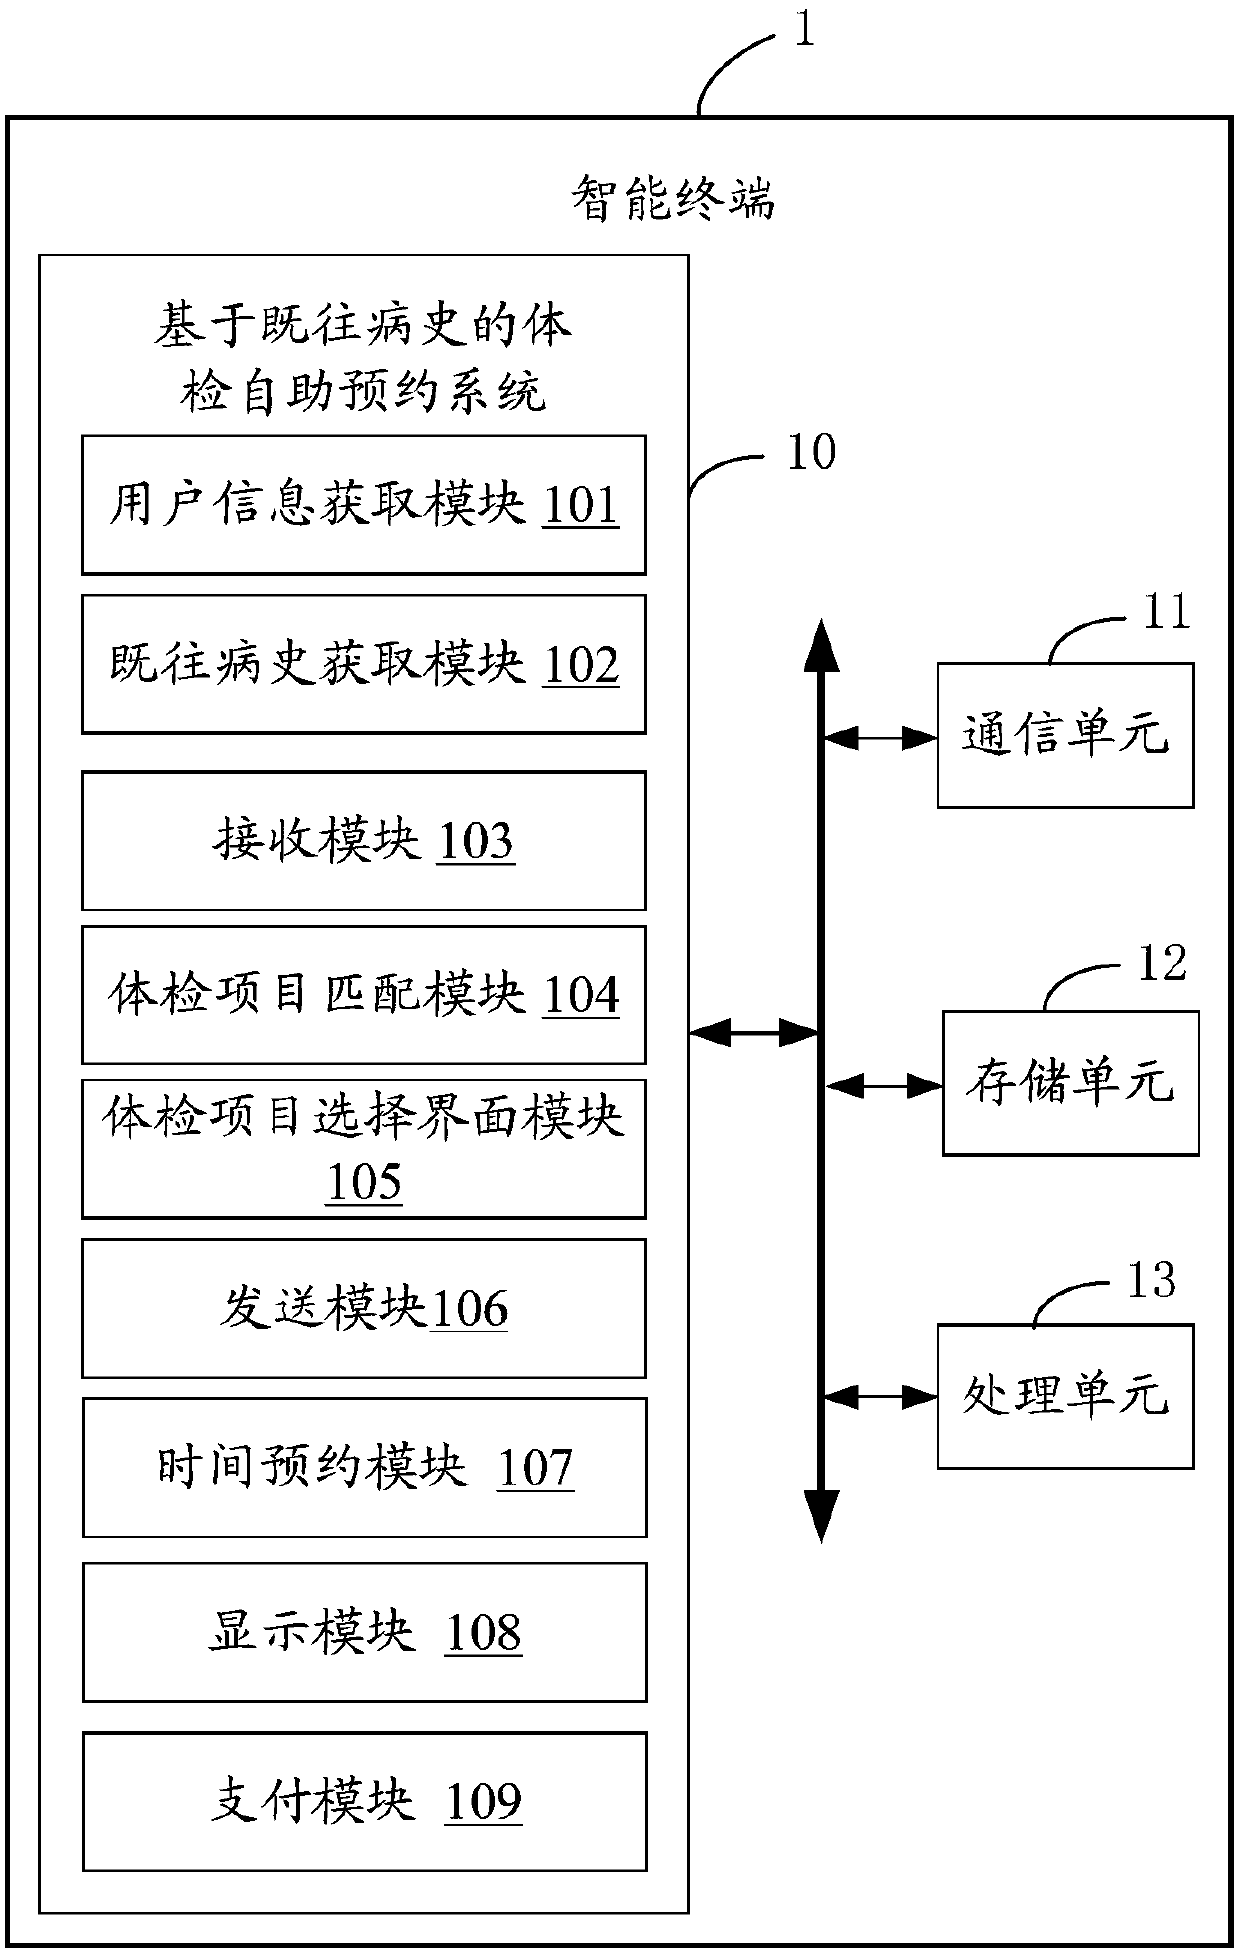 Physical examination self-service appointment system and method based on past medical history